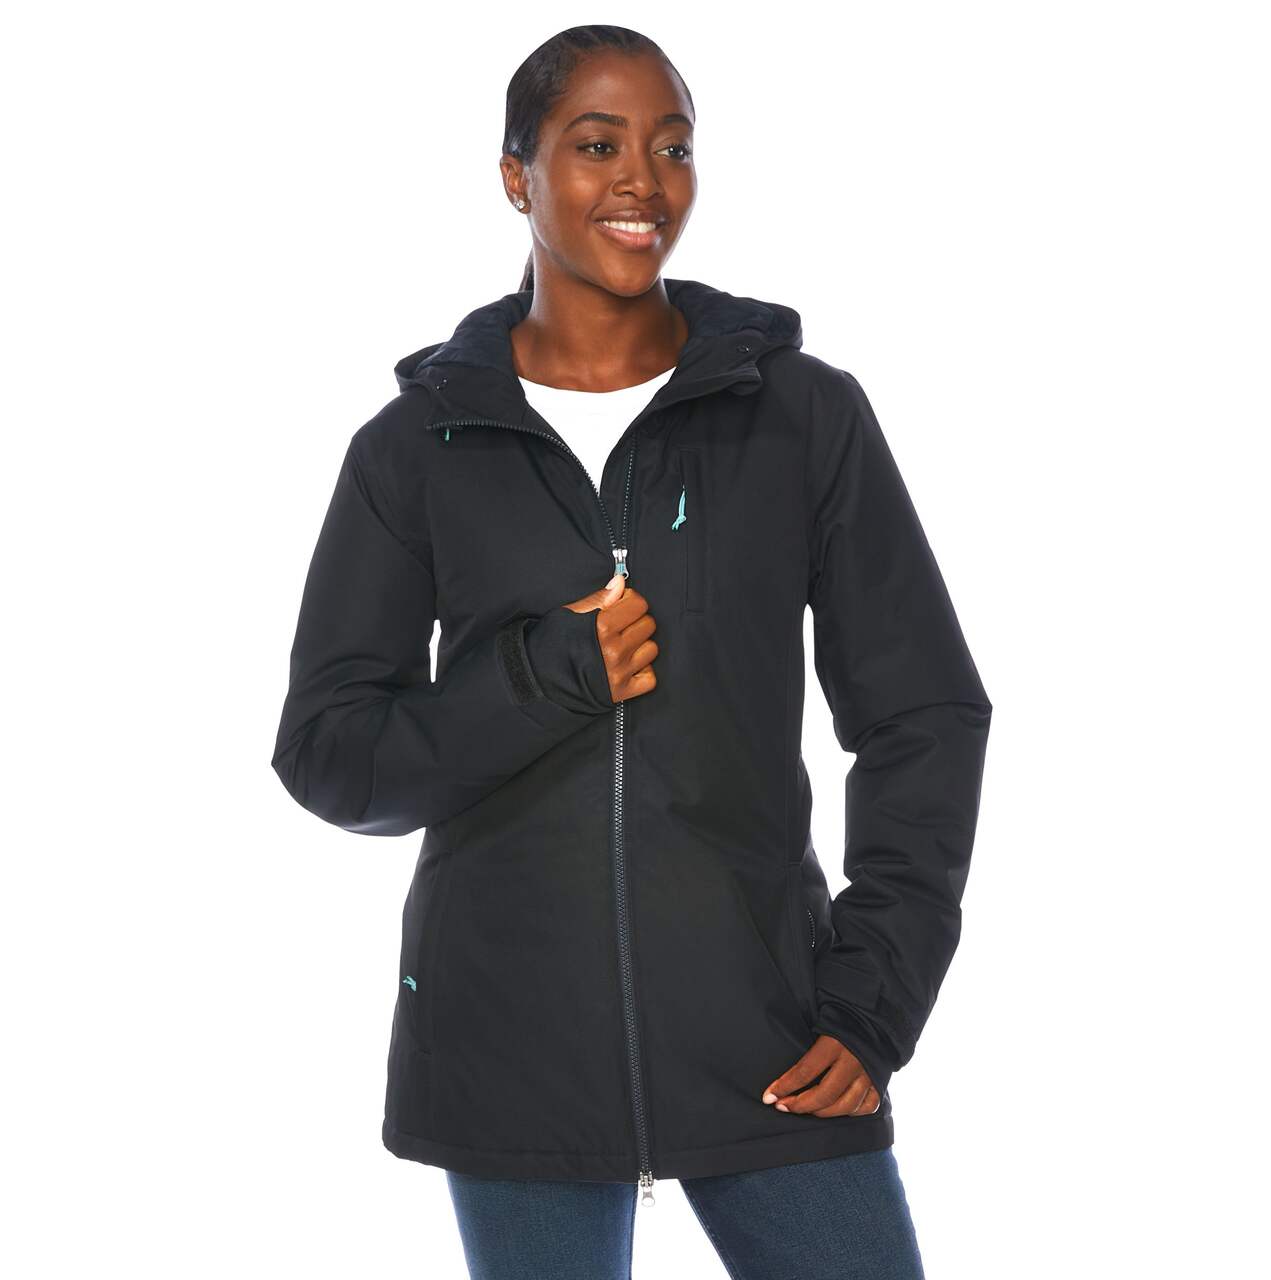 Outbound Women's Lola Thermal Insulated Hooded Winter Puffer Jacket  Water-Resistant, Black